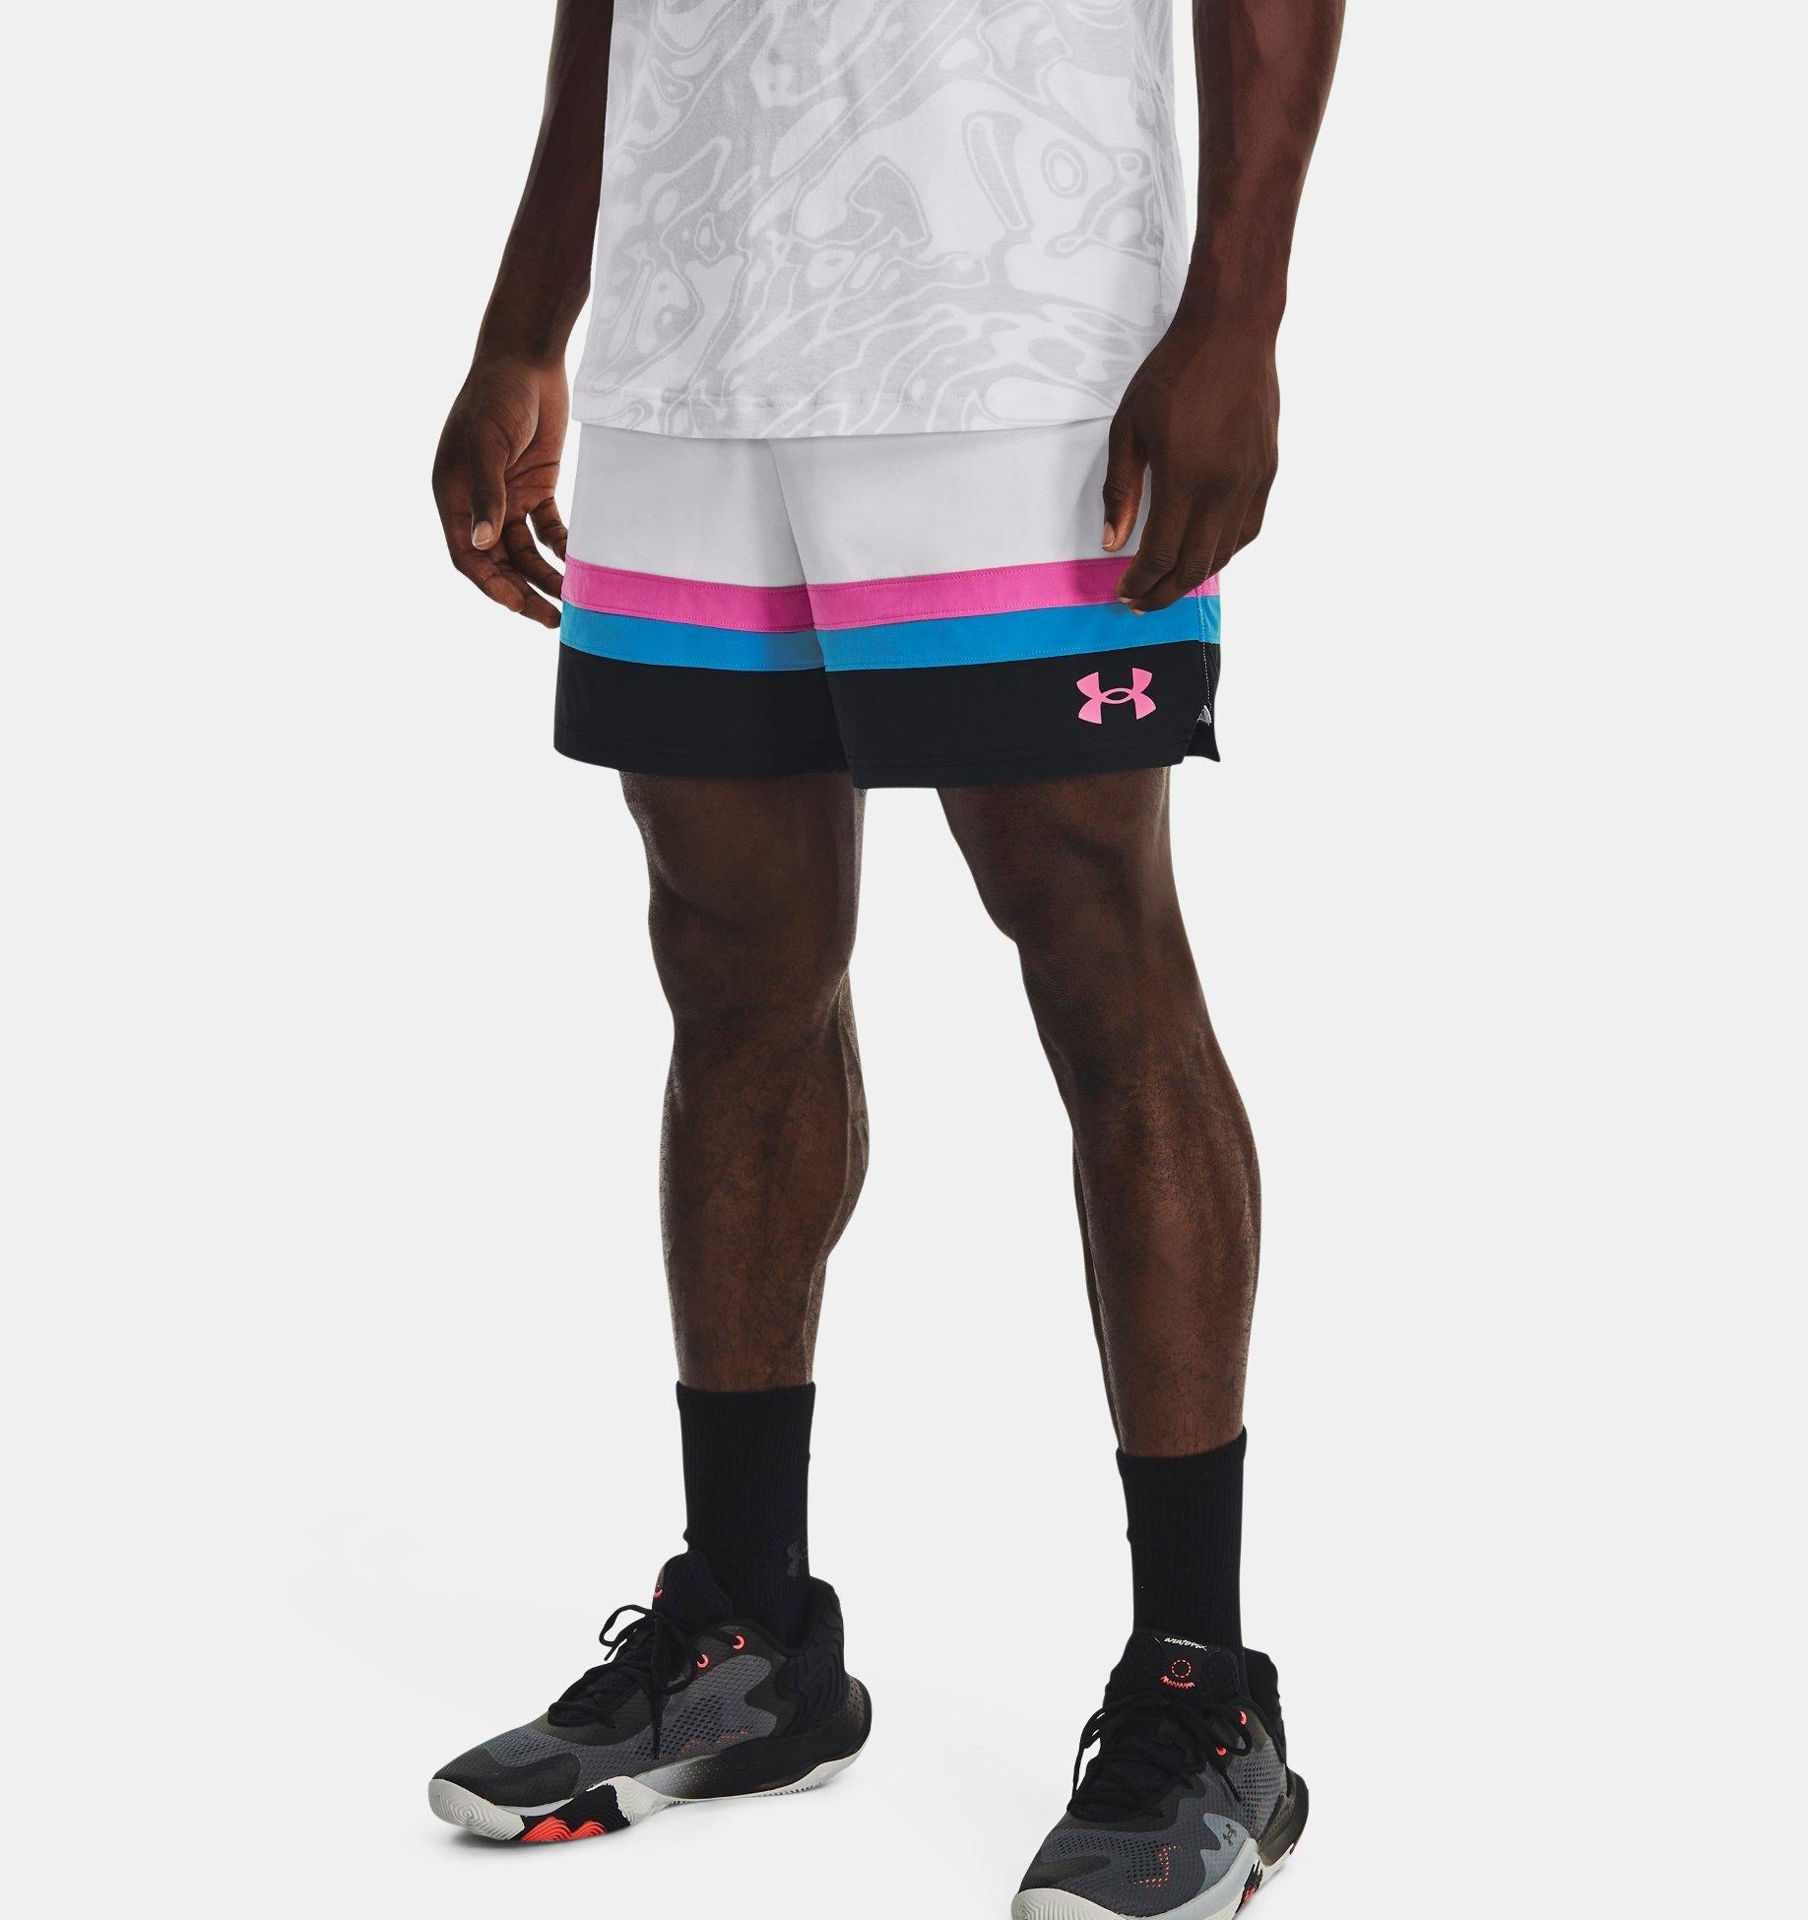 Picture of UA BASELINE WOVEN SHORT  M White